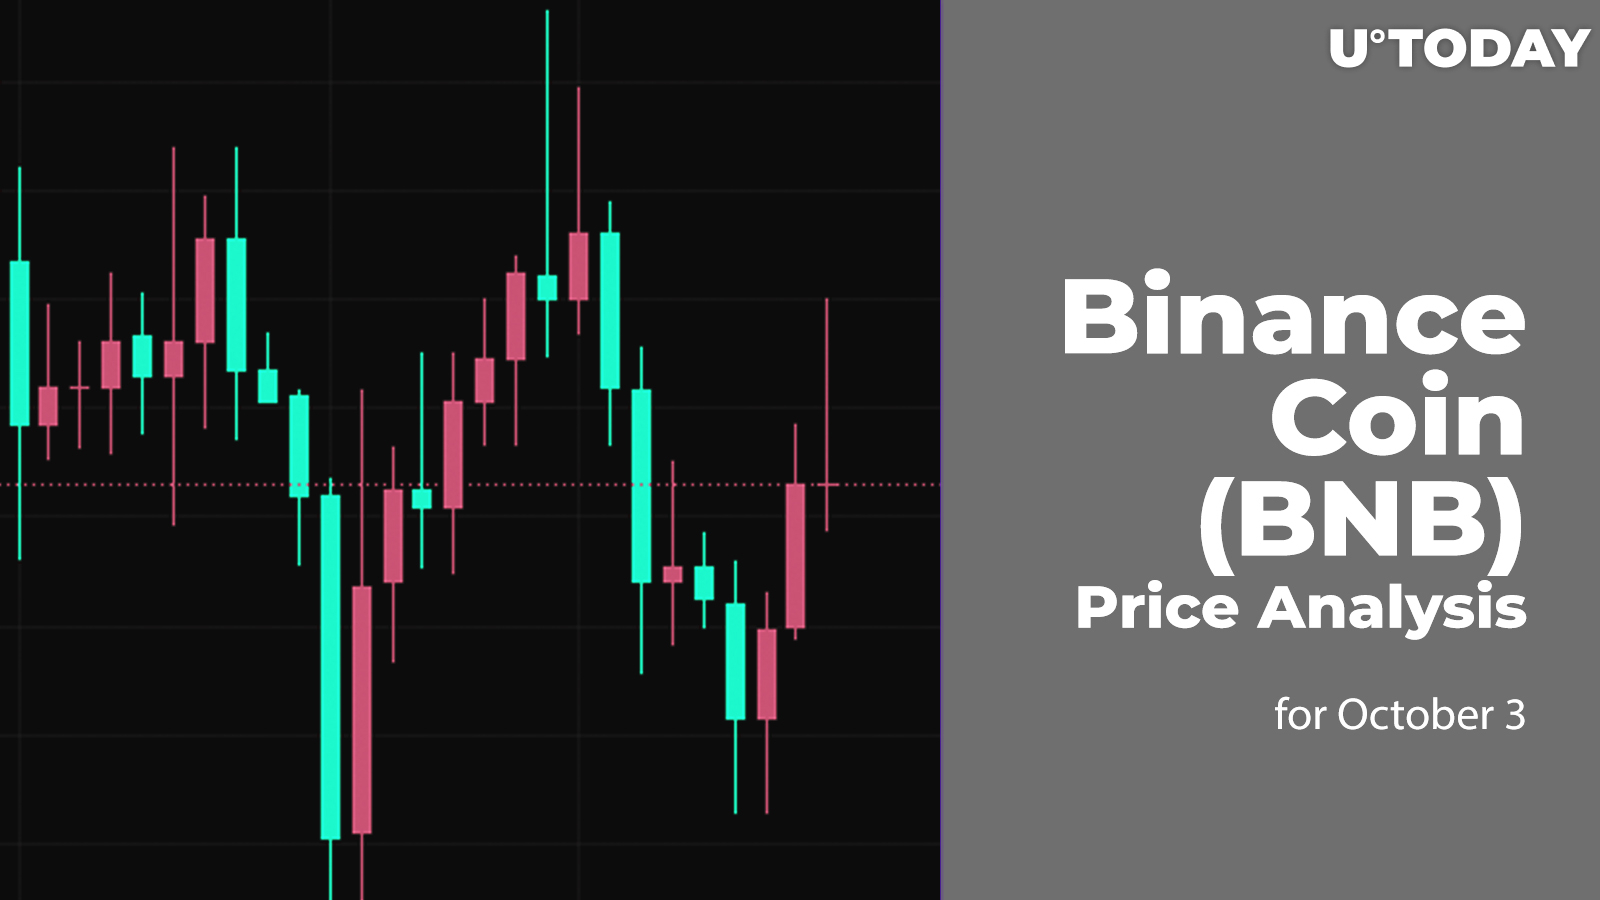 Binance Coin (BNB) Price Analysis for October 3